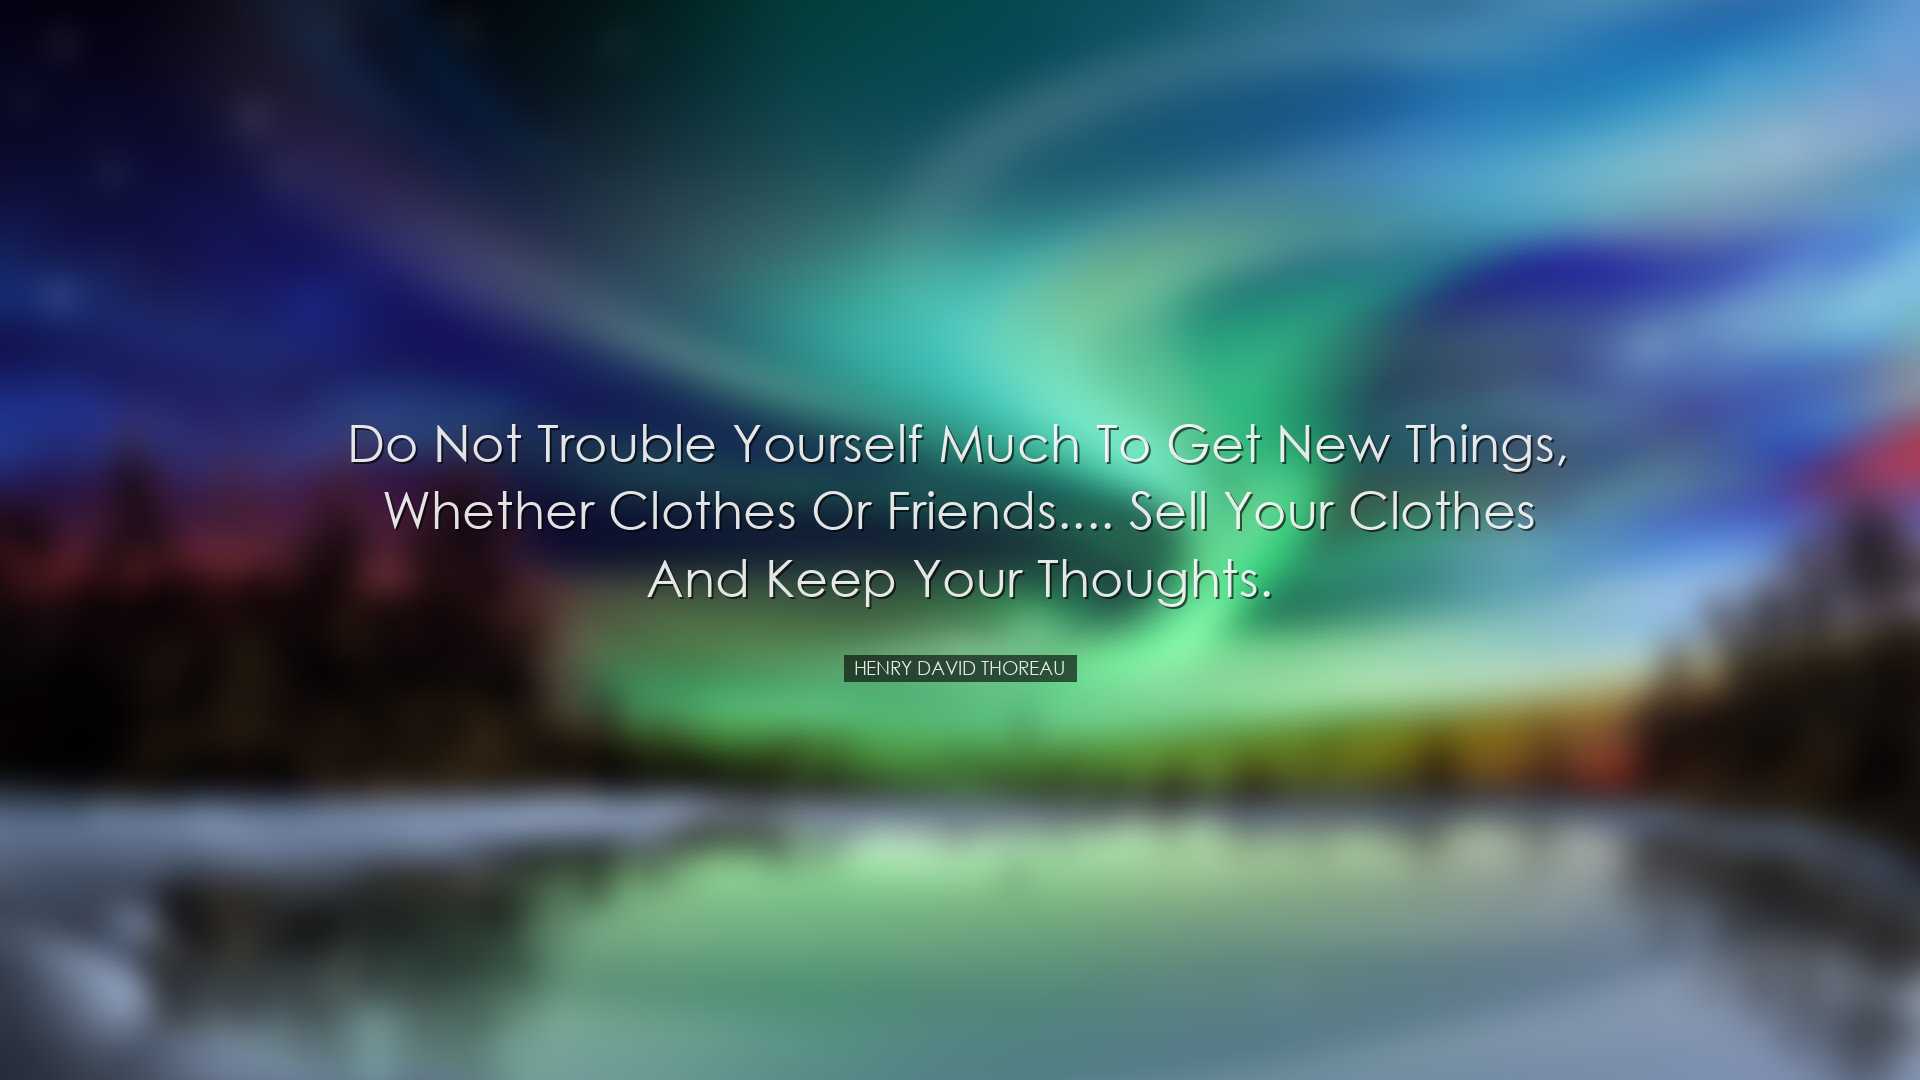 Do not trouble yourself much to get new things, whether clothes or